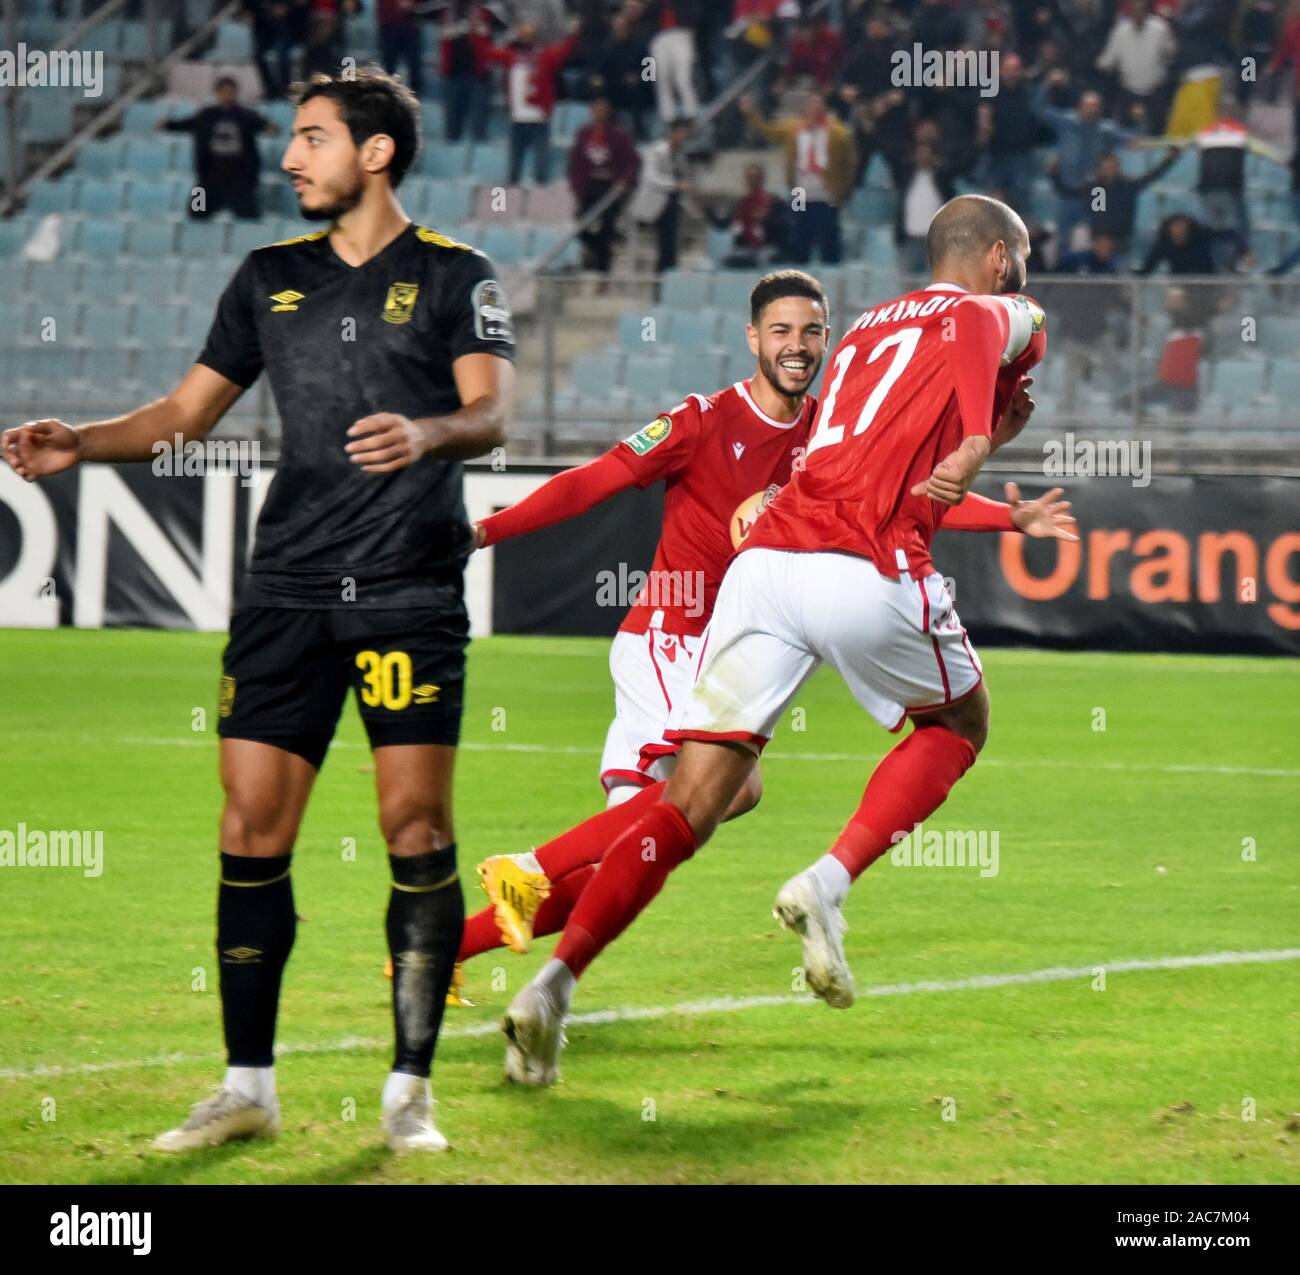 Etoile's player, Yassin chikhaoui celebrates during the CAF Champions  League 2019 - 20 football match between Al-